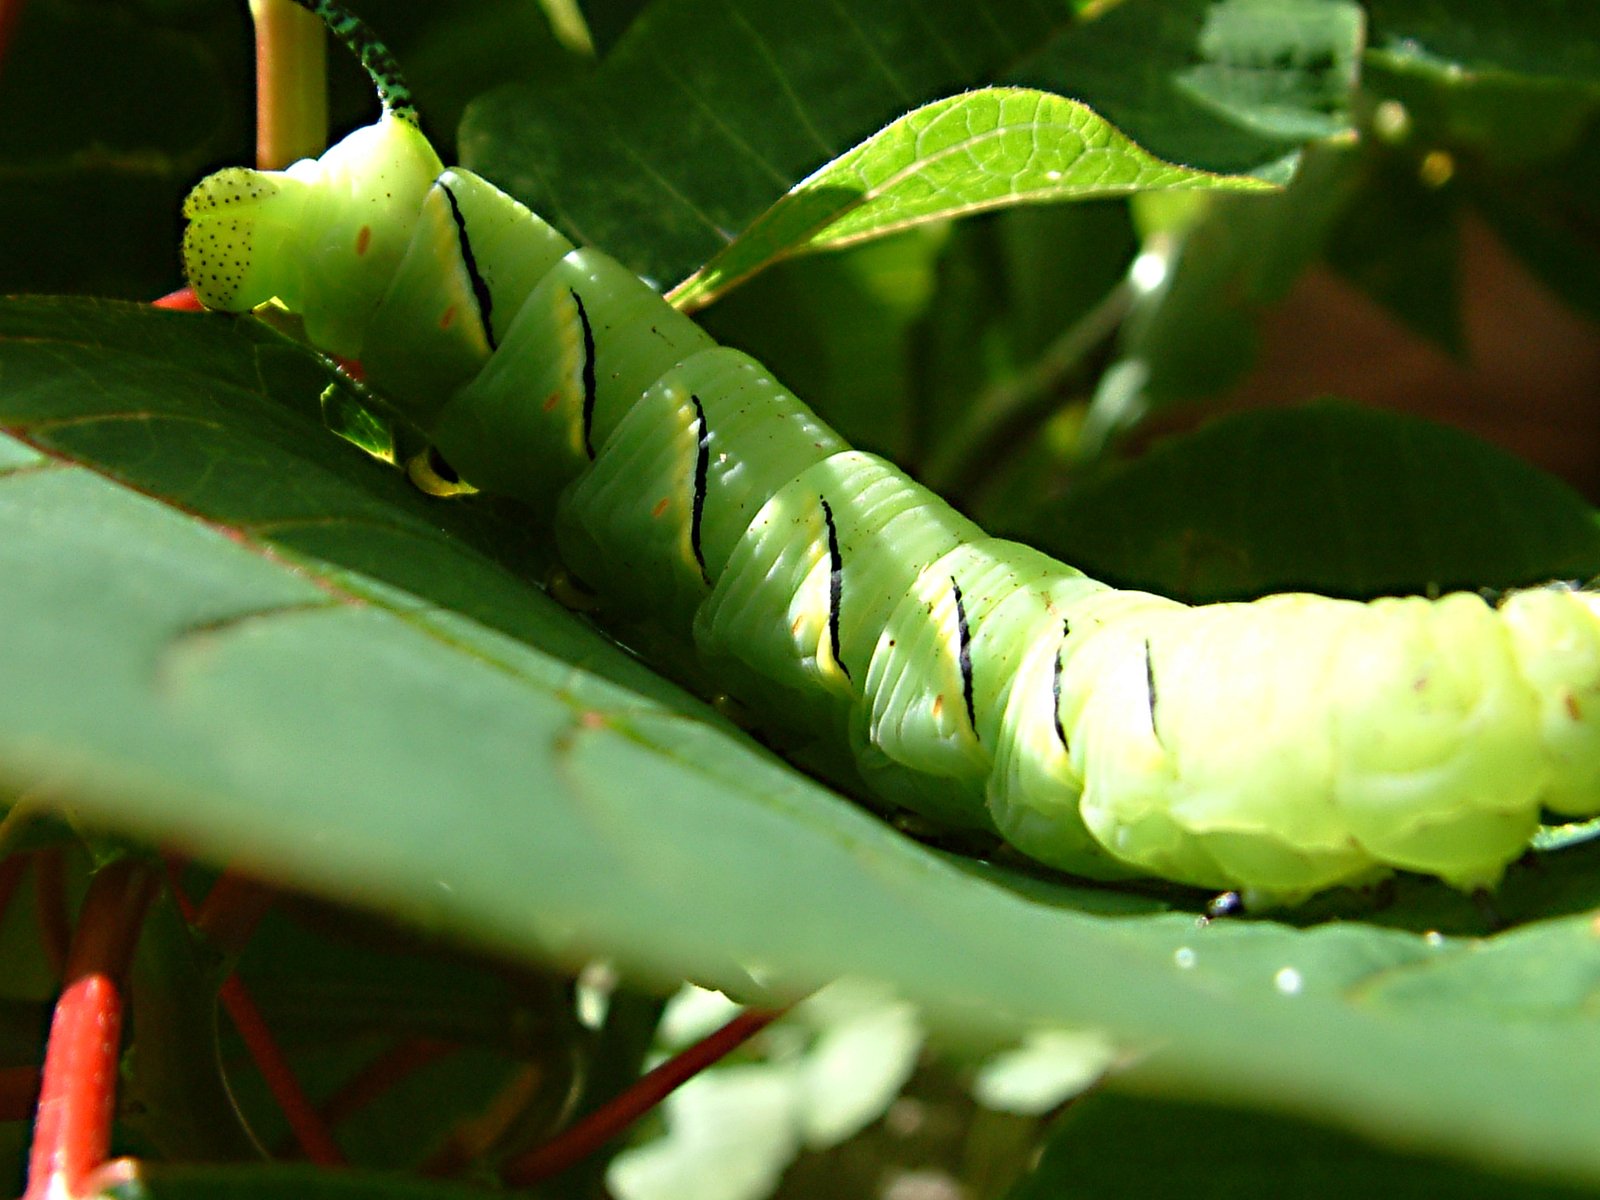 a large green caterpillar is crawling on leaves